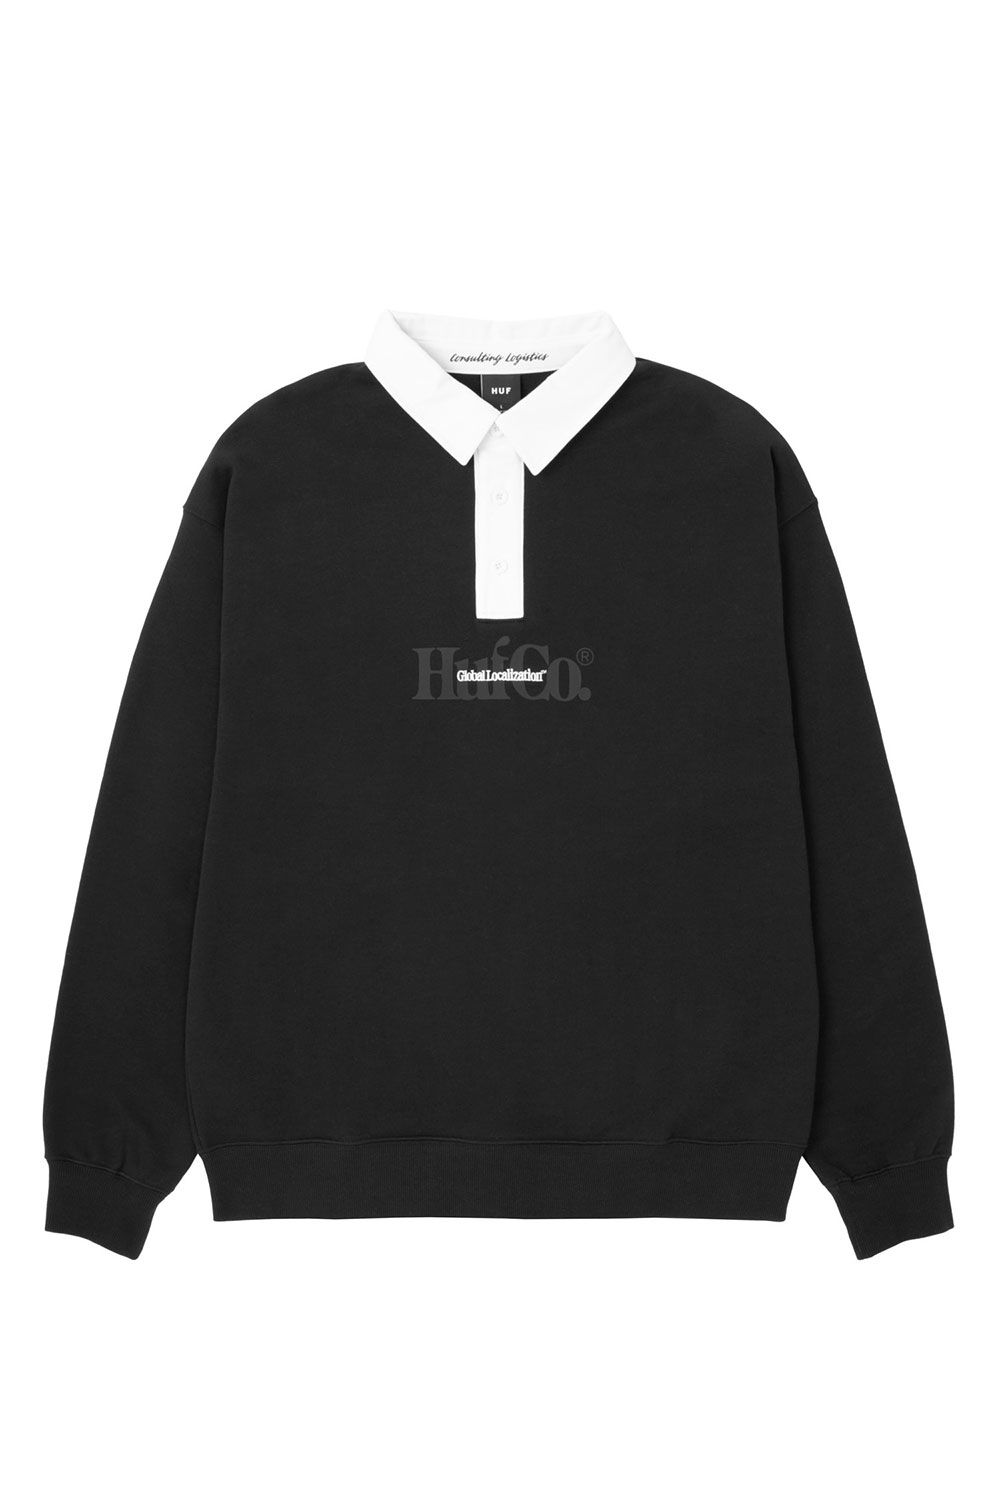 Polo G着用　ricchezza forever ジャージセットアップ XL